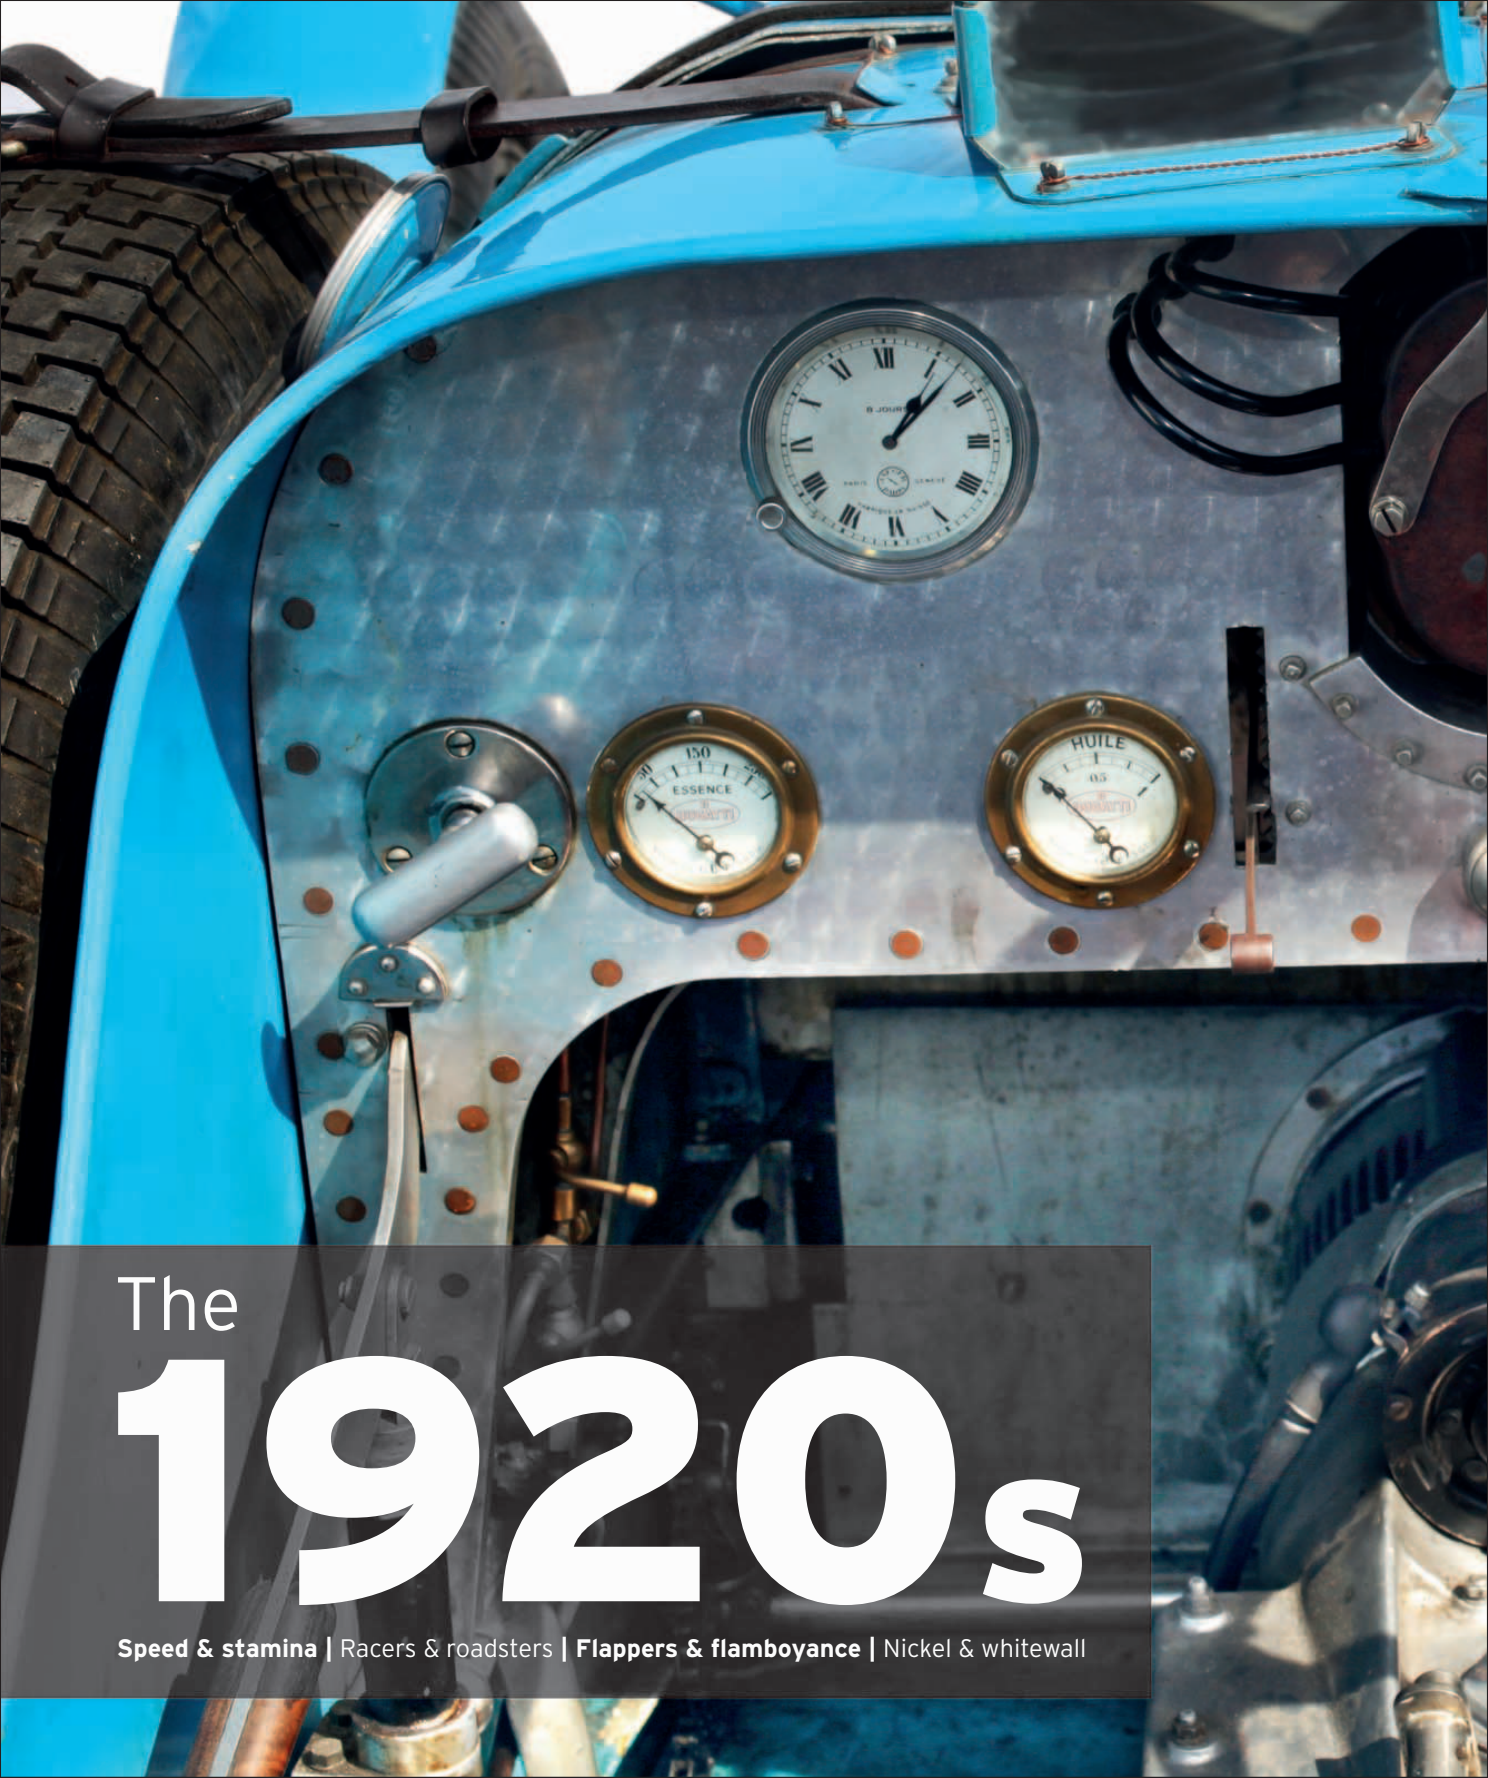 Car%20-%20The%20Definitive%20Visual%20History%20of%20the%20Automobile_038.png